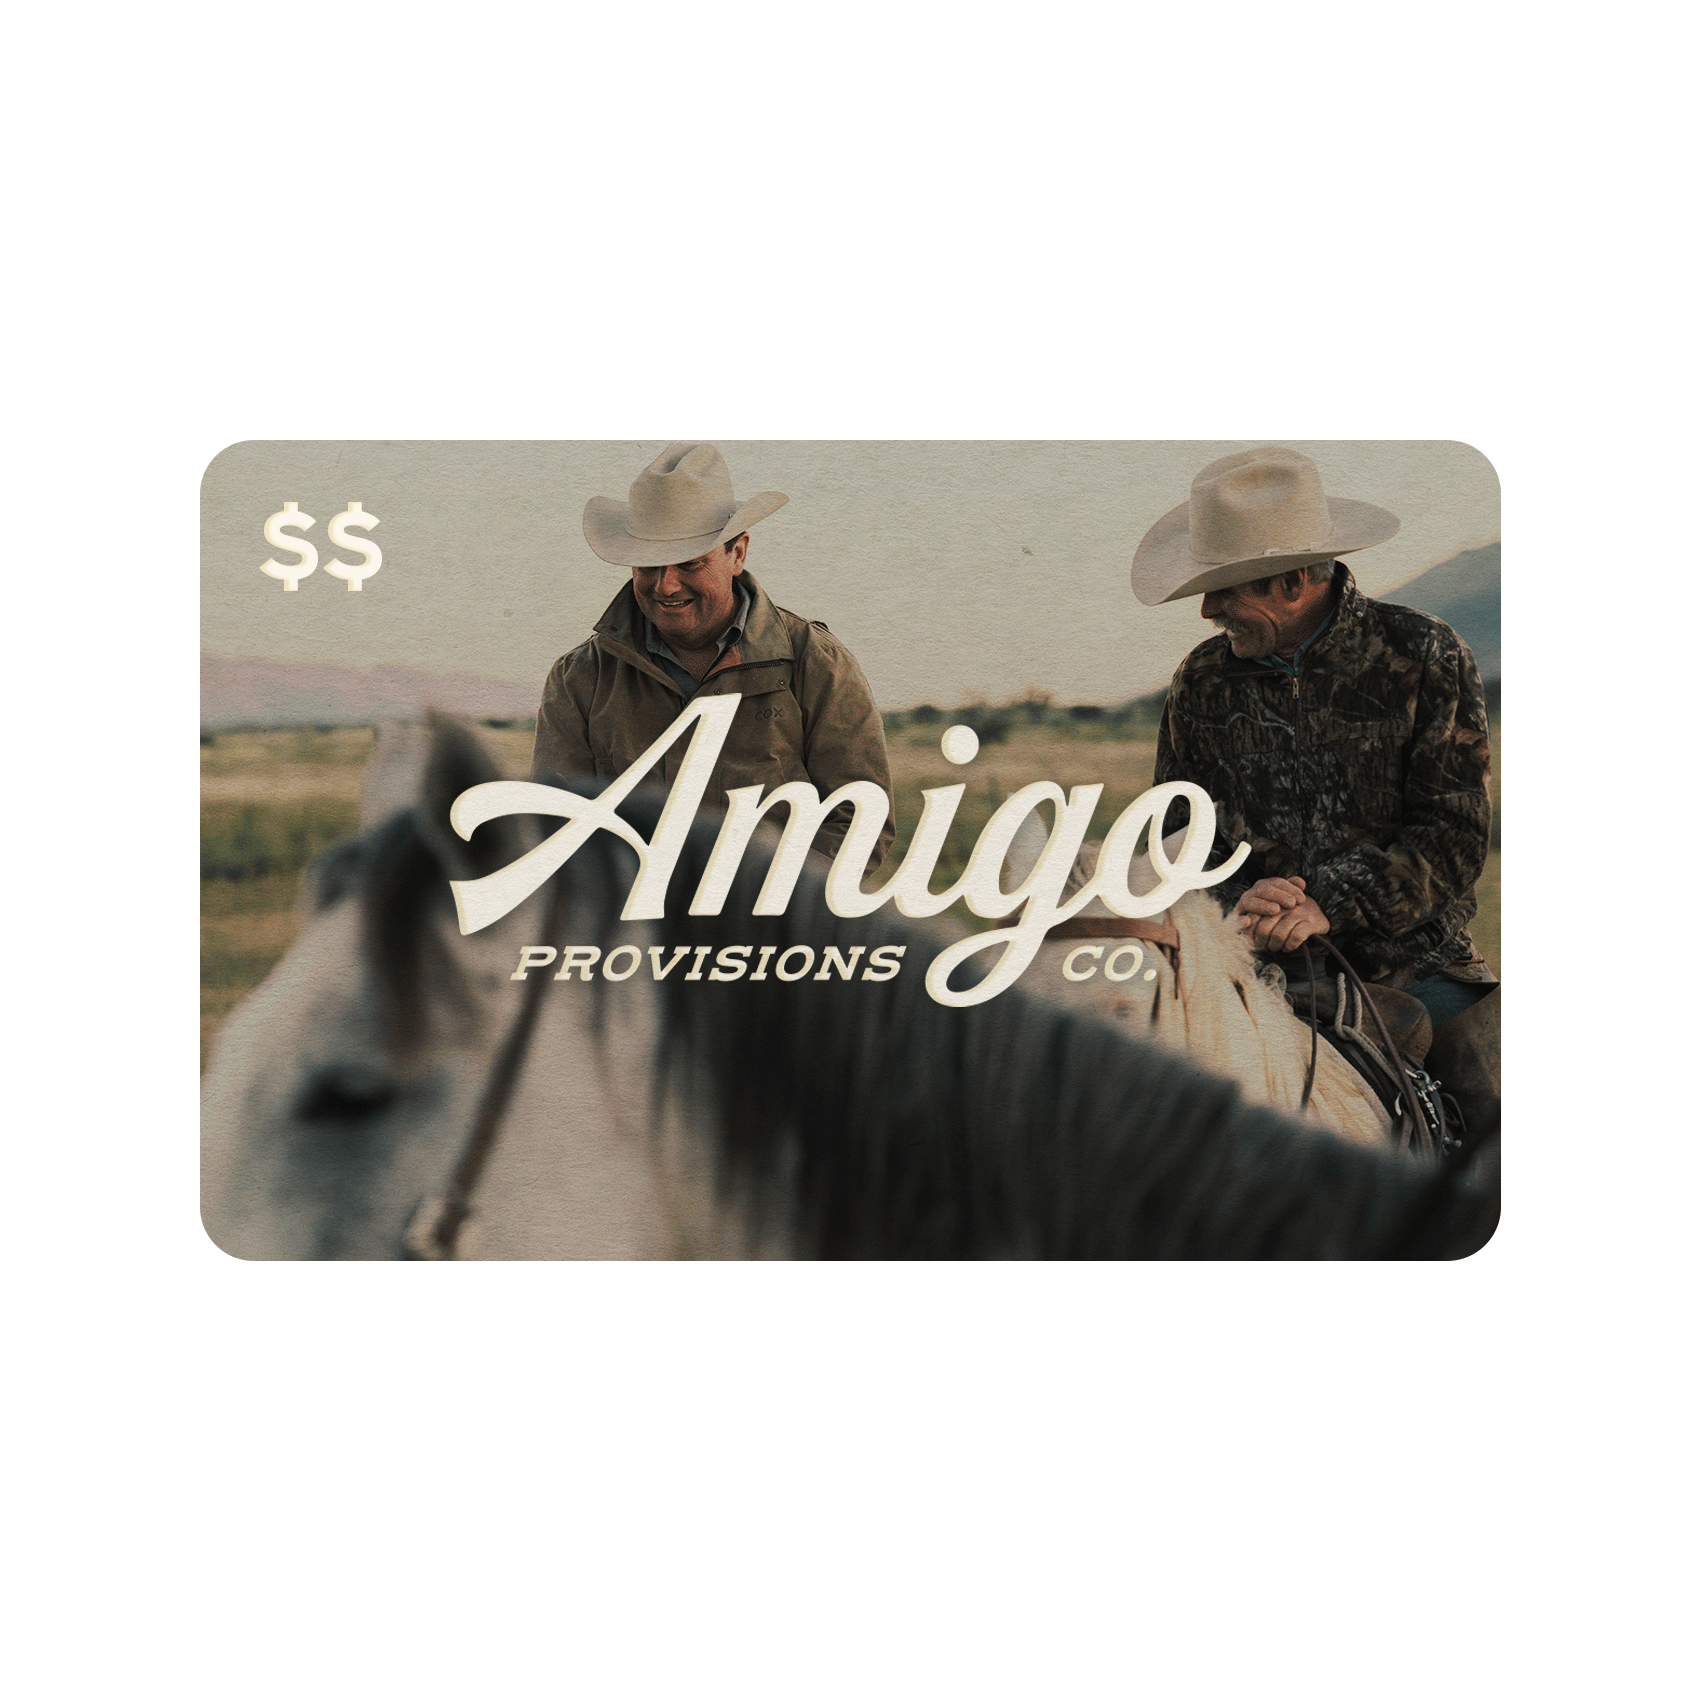 Amigos Mexican Cocina Gift Cards and Gift Certificate - 1906